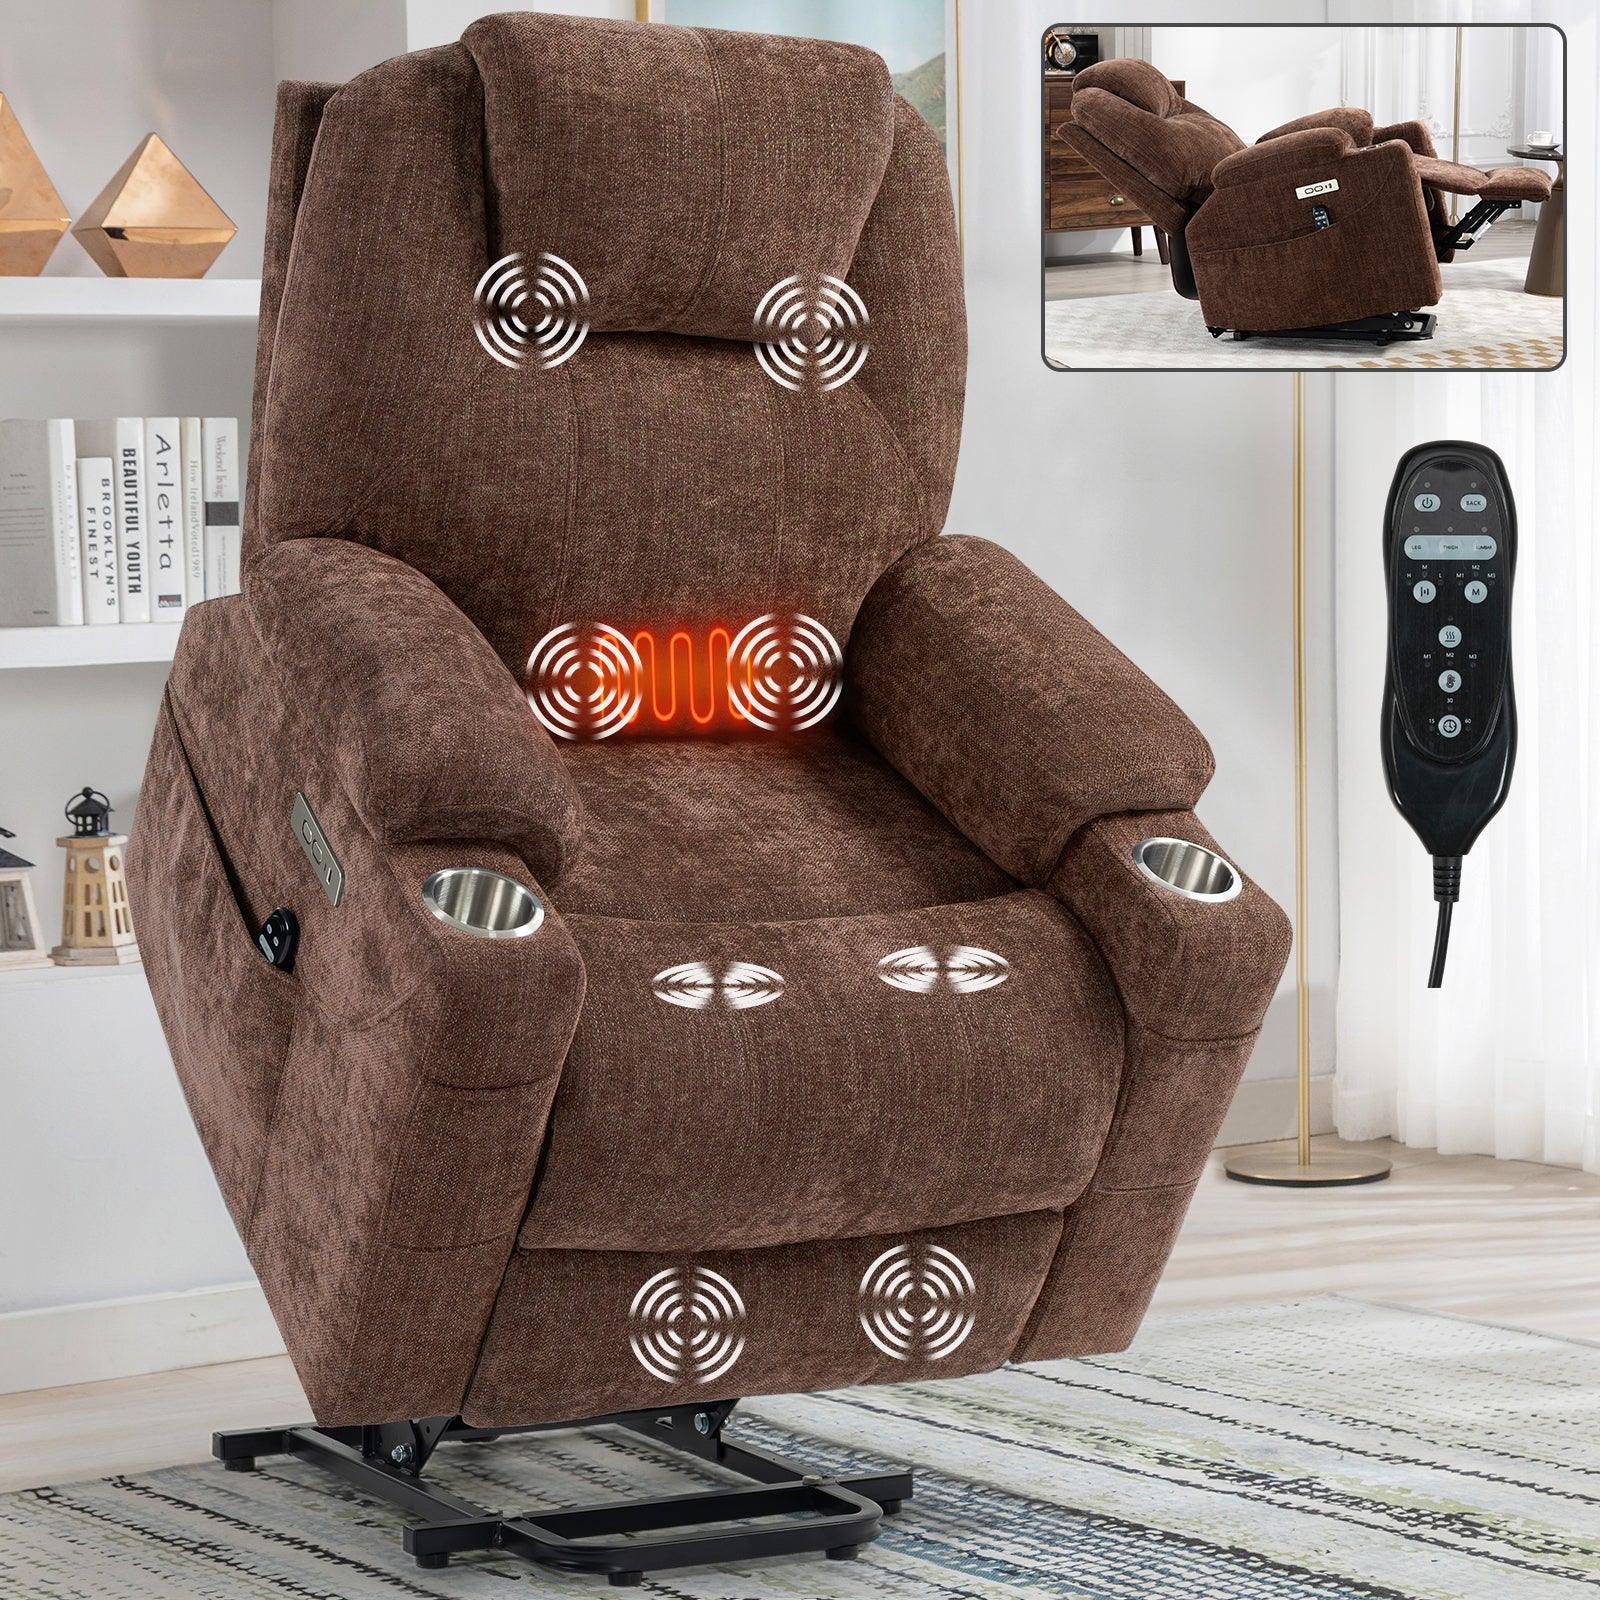 🆓🚛 Okin Motor Up To 350 Lbs Chenille Power Lift Recliner Chair, Heavy Duty Motion Mechanism With 8-Point Vibration Massage & Lumbar Heating, Usb & Type-C Ports, Stainless Steel Cup Holders, Brown